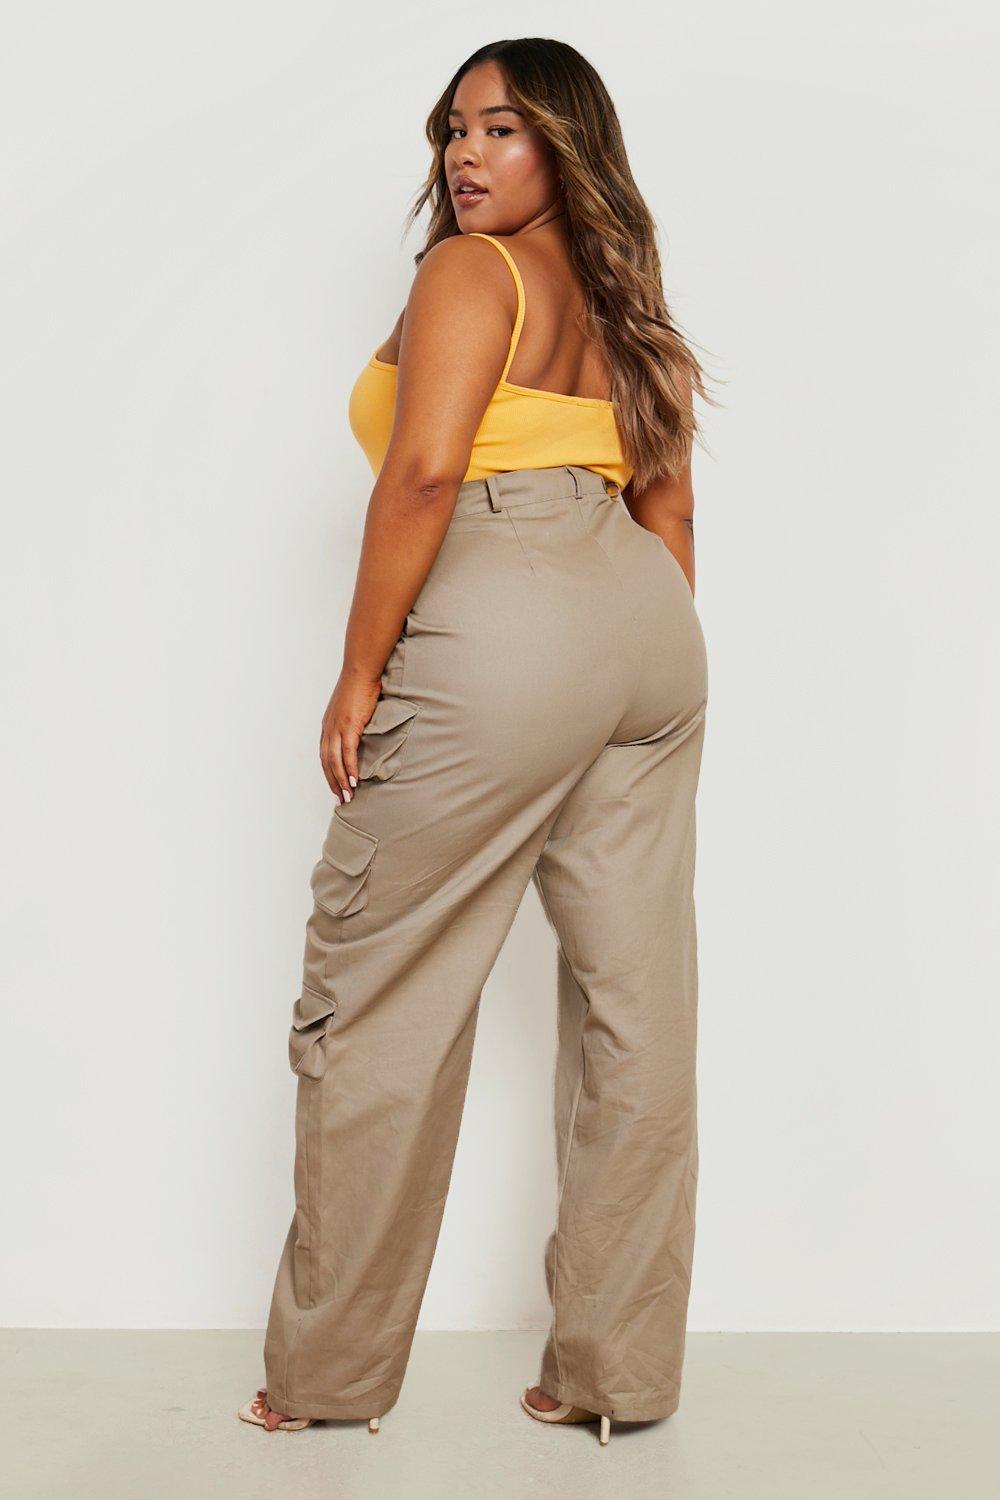 Cargo Pants For Ladies - Multiple Color Options, Multisize, Fashion, Tops For Women